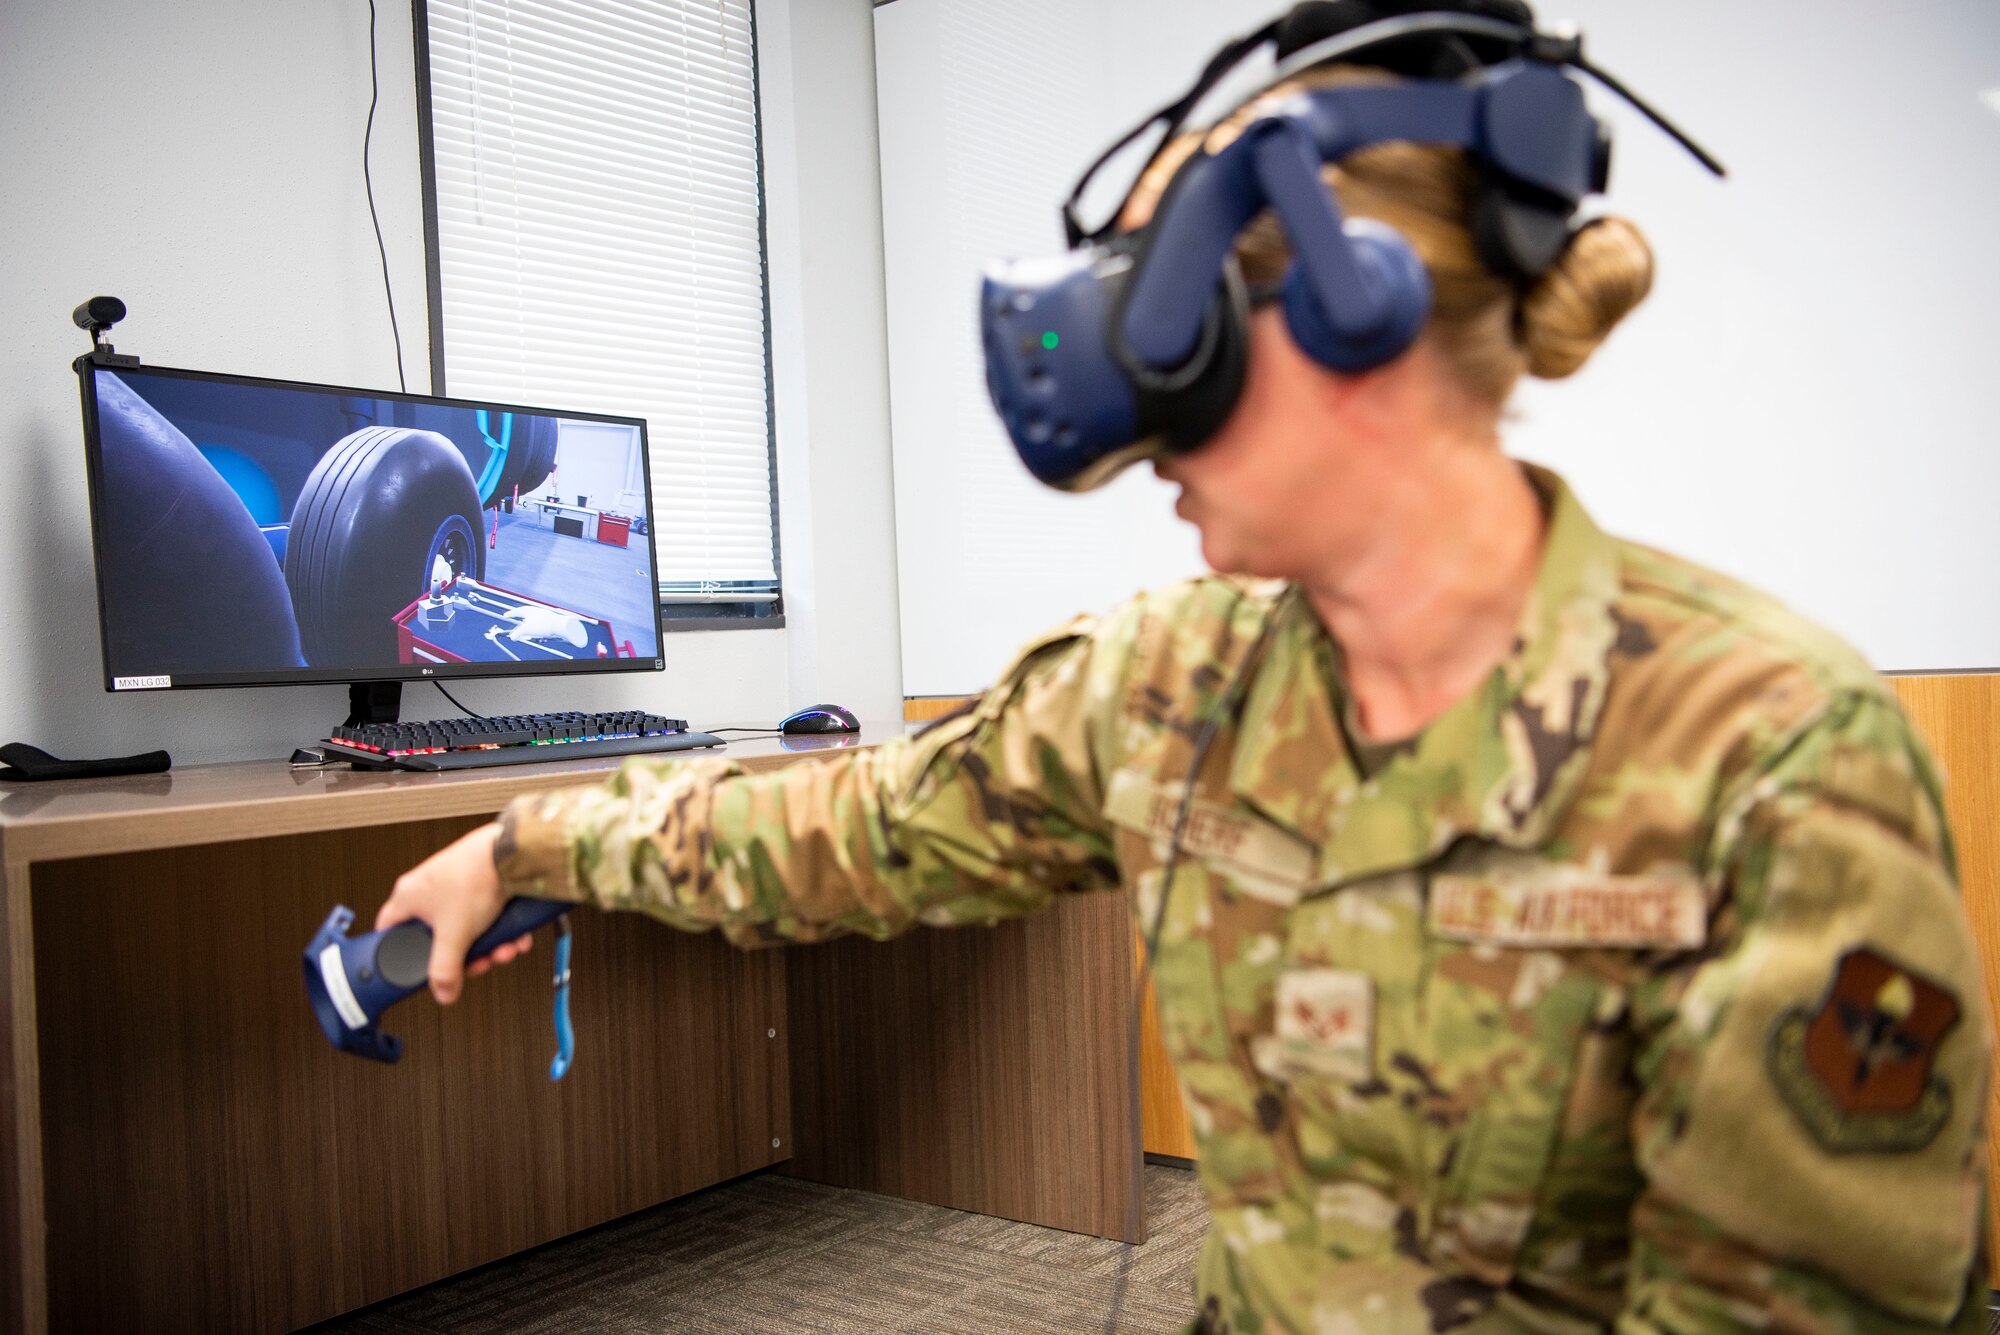 Air Force Staff Sgt. Renee Scherf, Detachment 23 curriculum engineer, MC-130H subject matter expert, demonstrates a virtual reality training system. Members of Detachment 23’s Tech Training Transformation are part of Air Education and Training Command and responsible for re-engineering tech training. Their cutting-edge program utilizes virtual reality training systems and artificial intelligence, among other modalities, to transform the Airmen development process. (Photo by Air Force Staff Sgt Keith James)